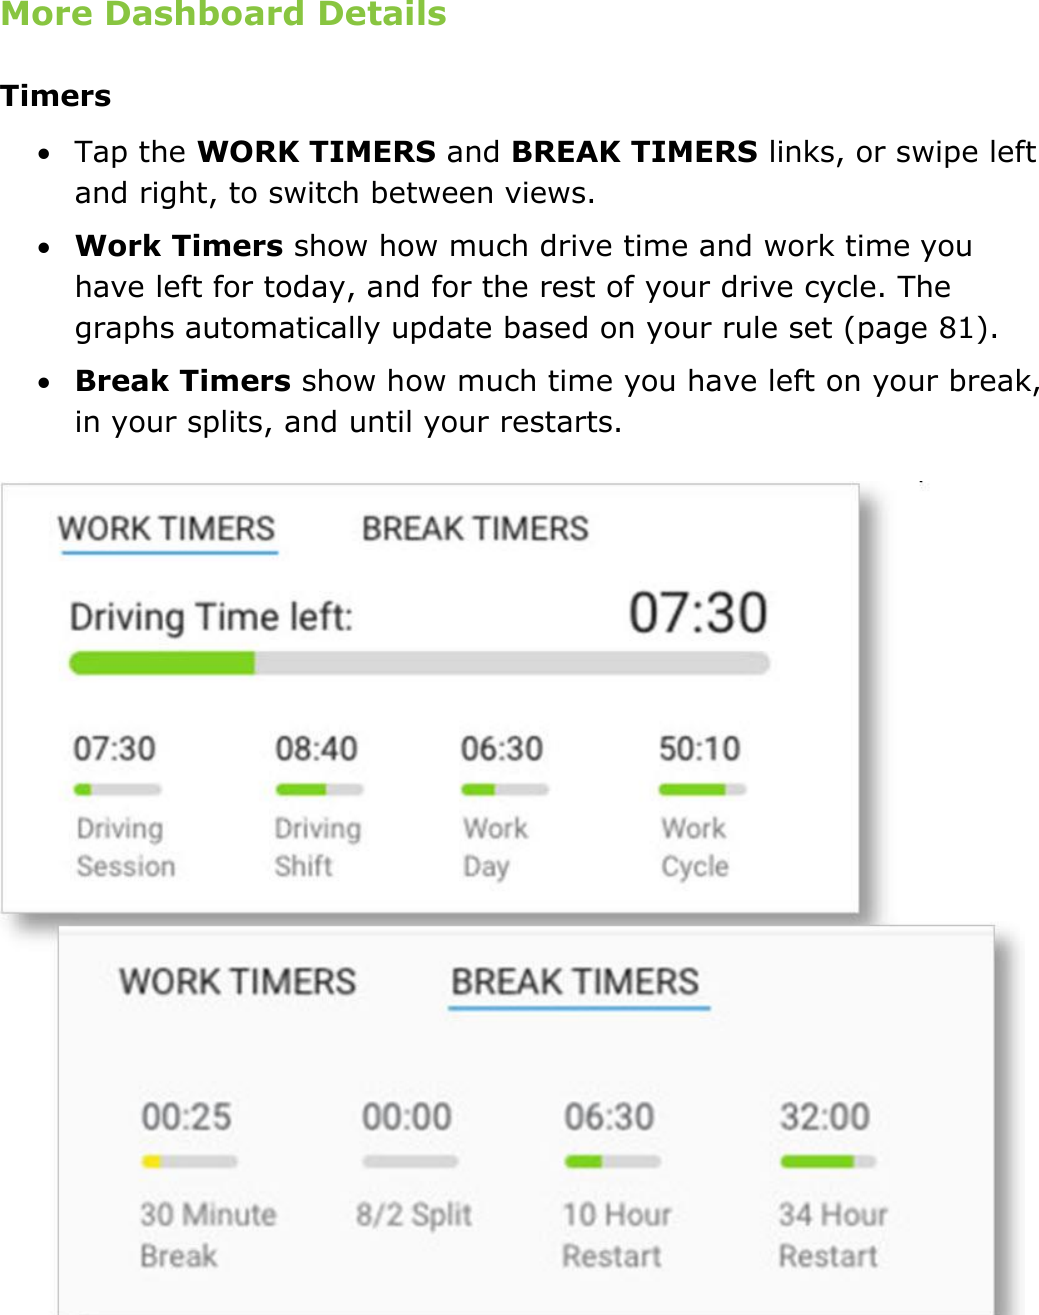 Set My Duty Status DriverConnect User Guide  22 © 2016-2017, Rand McNally, Inc. More Dashboard Details Timers  Tap the WORK TIMERS and BREAK TIMERS links, or swipe left and right, to switch between views.  Work Timers show how much drive time and work time you have left for today, and for the rest of your drive cycle. The graphs automatically update based on your rule set (page 81).  Break Timers show how much time you have left on your break, in your splits, and until your restarts.    